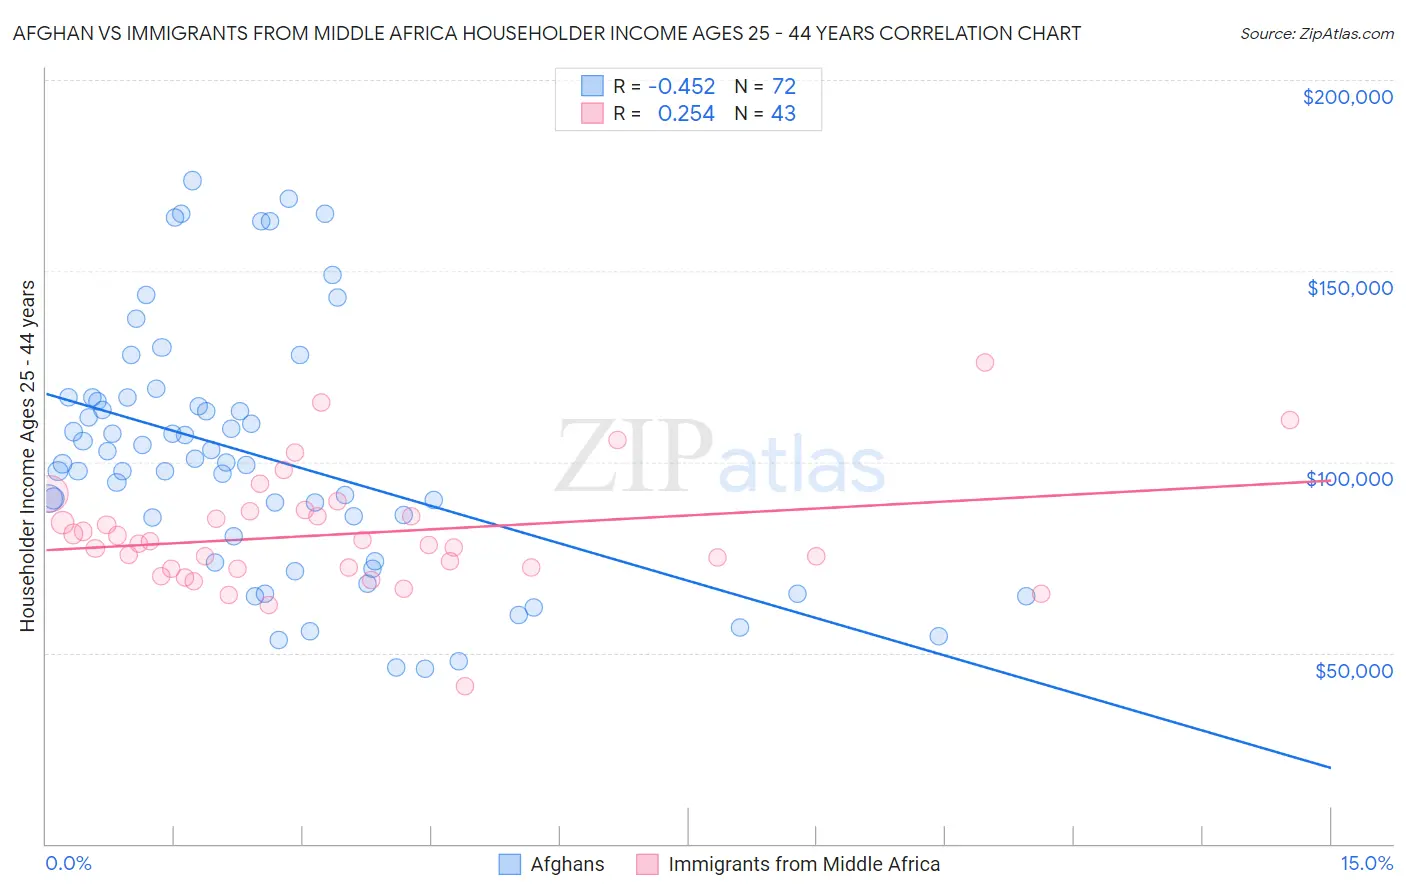 Afghan vs Immigrants from Middle Africa Householder Income Ages 25 - 44 years